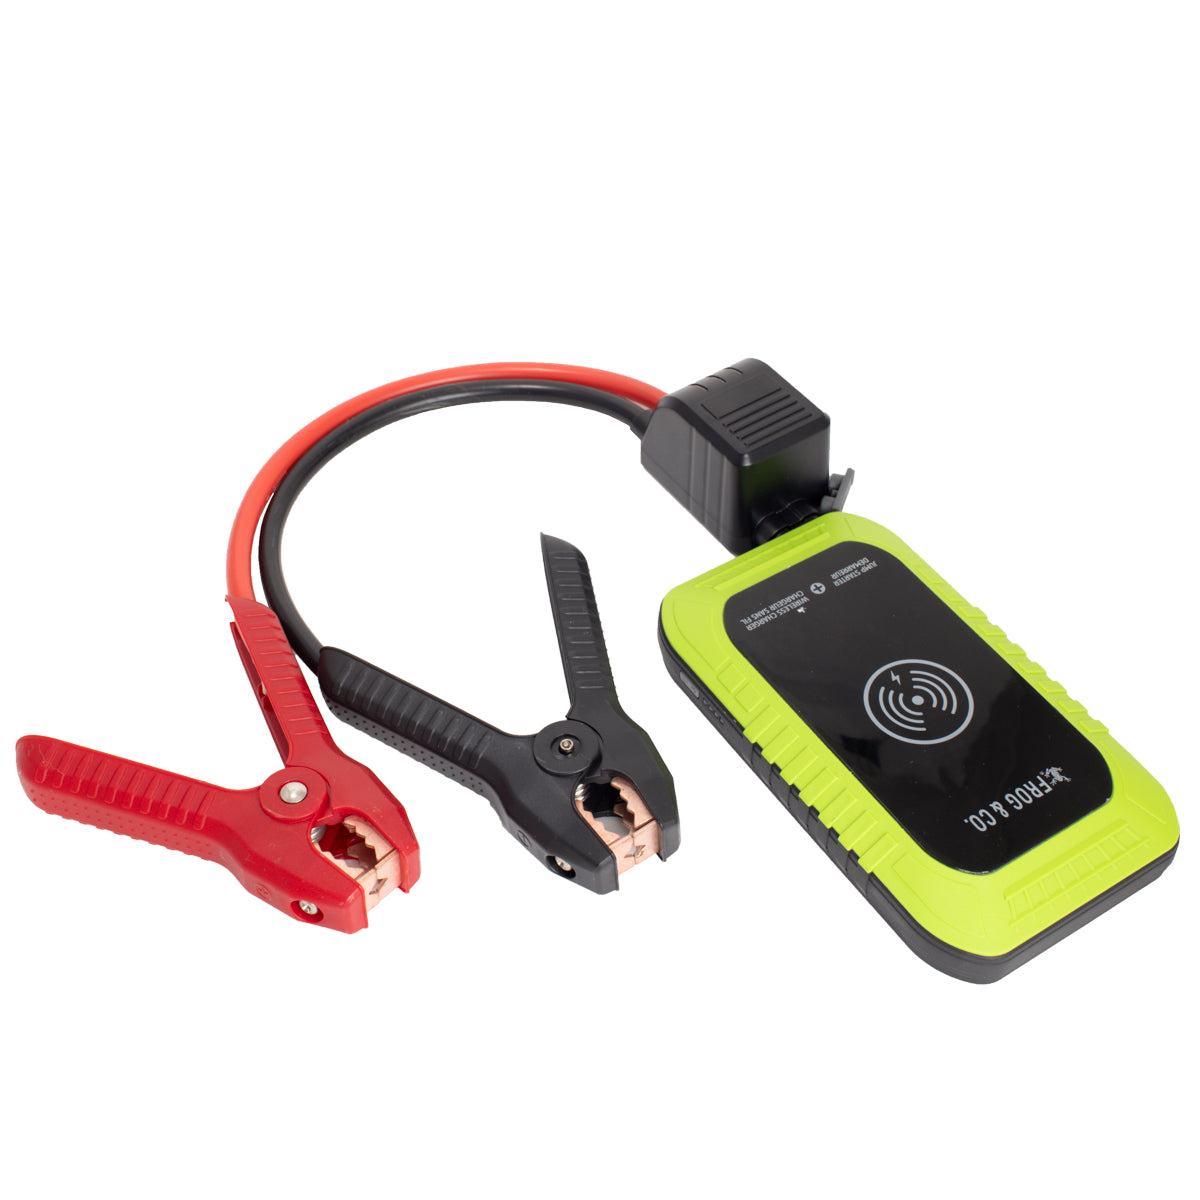 Car Safety Emergency Survival Pocket Jump and Portable Power Bank – Home  Self Defense Products